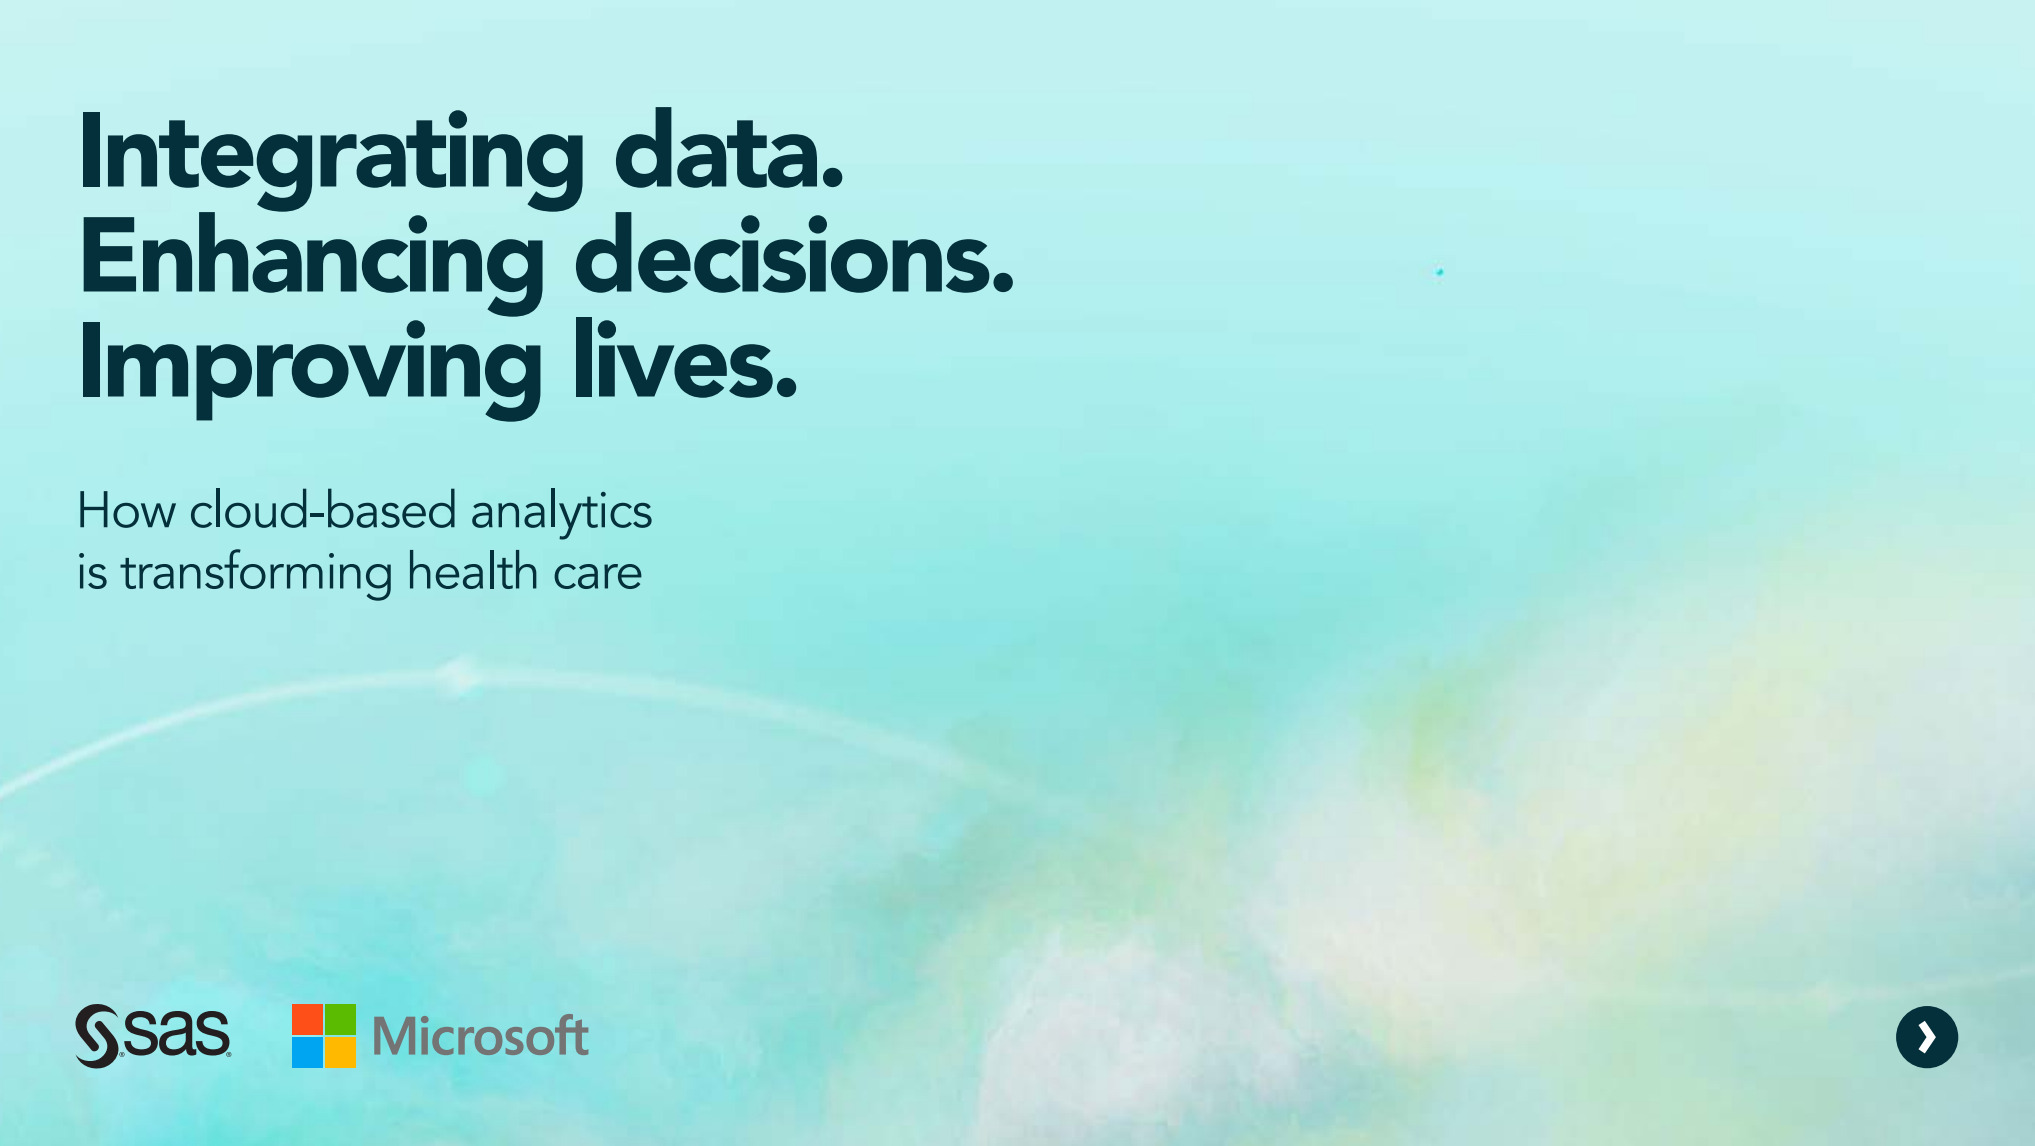 How cloud-based analytics is transforming healthcare